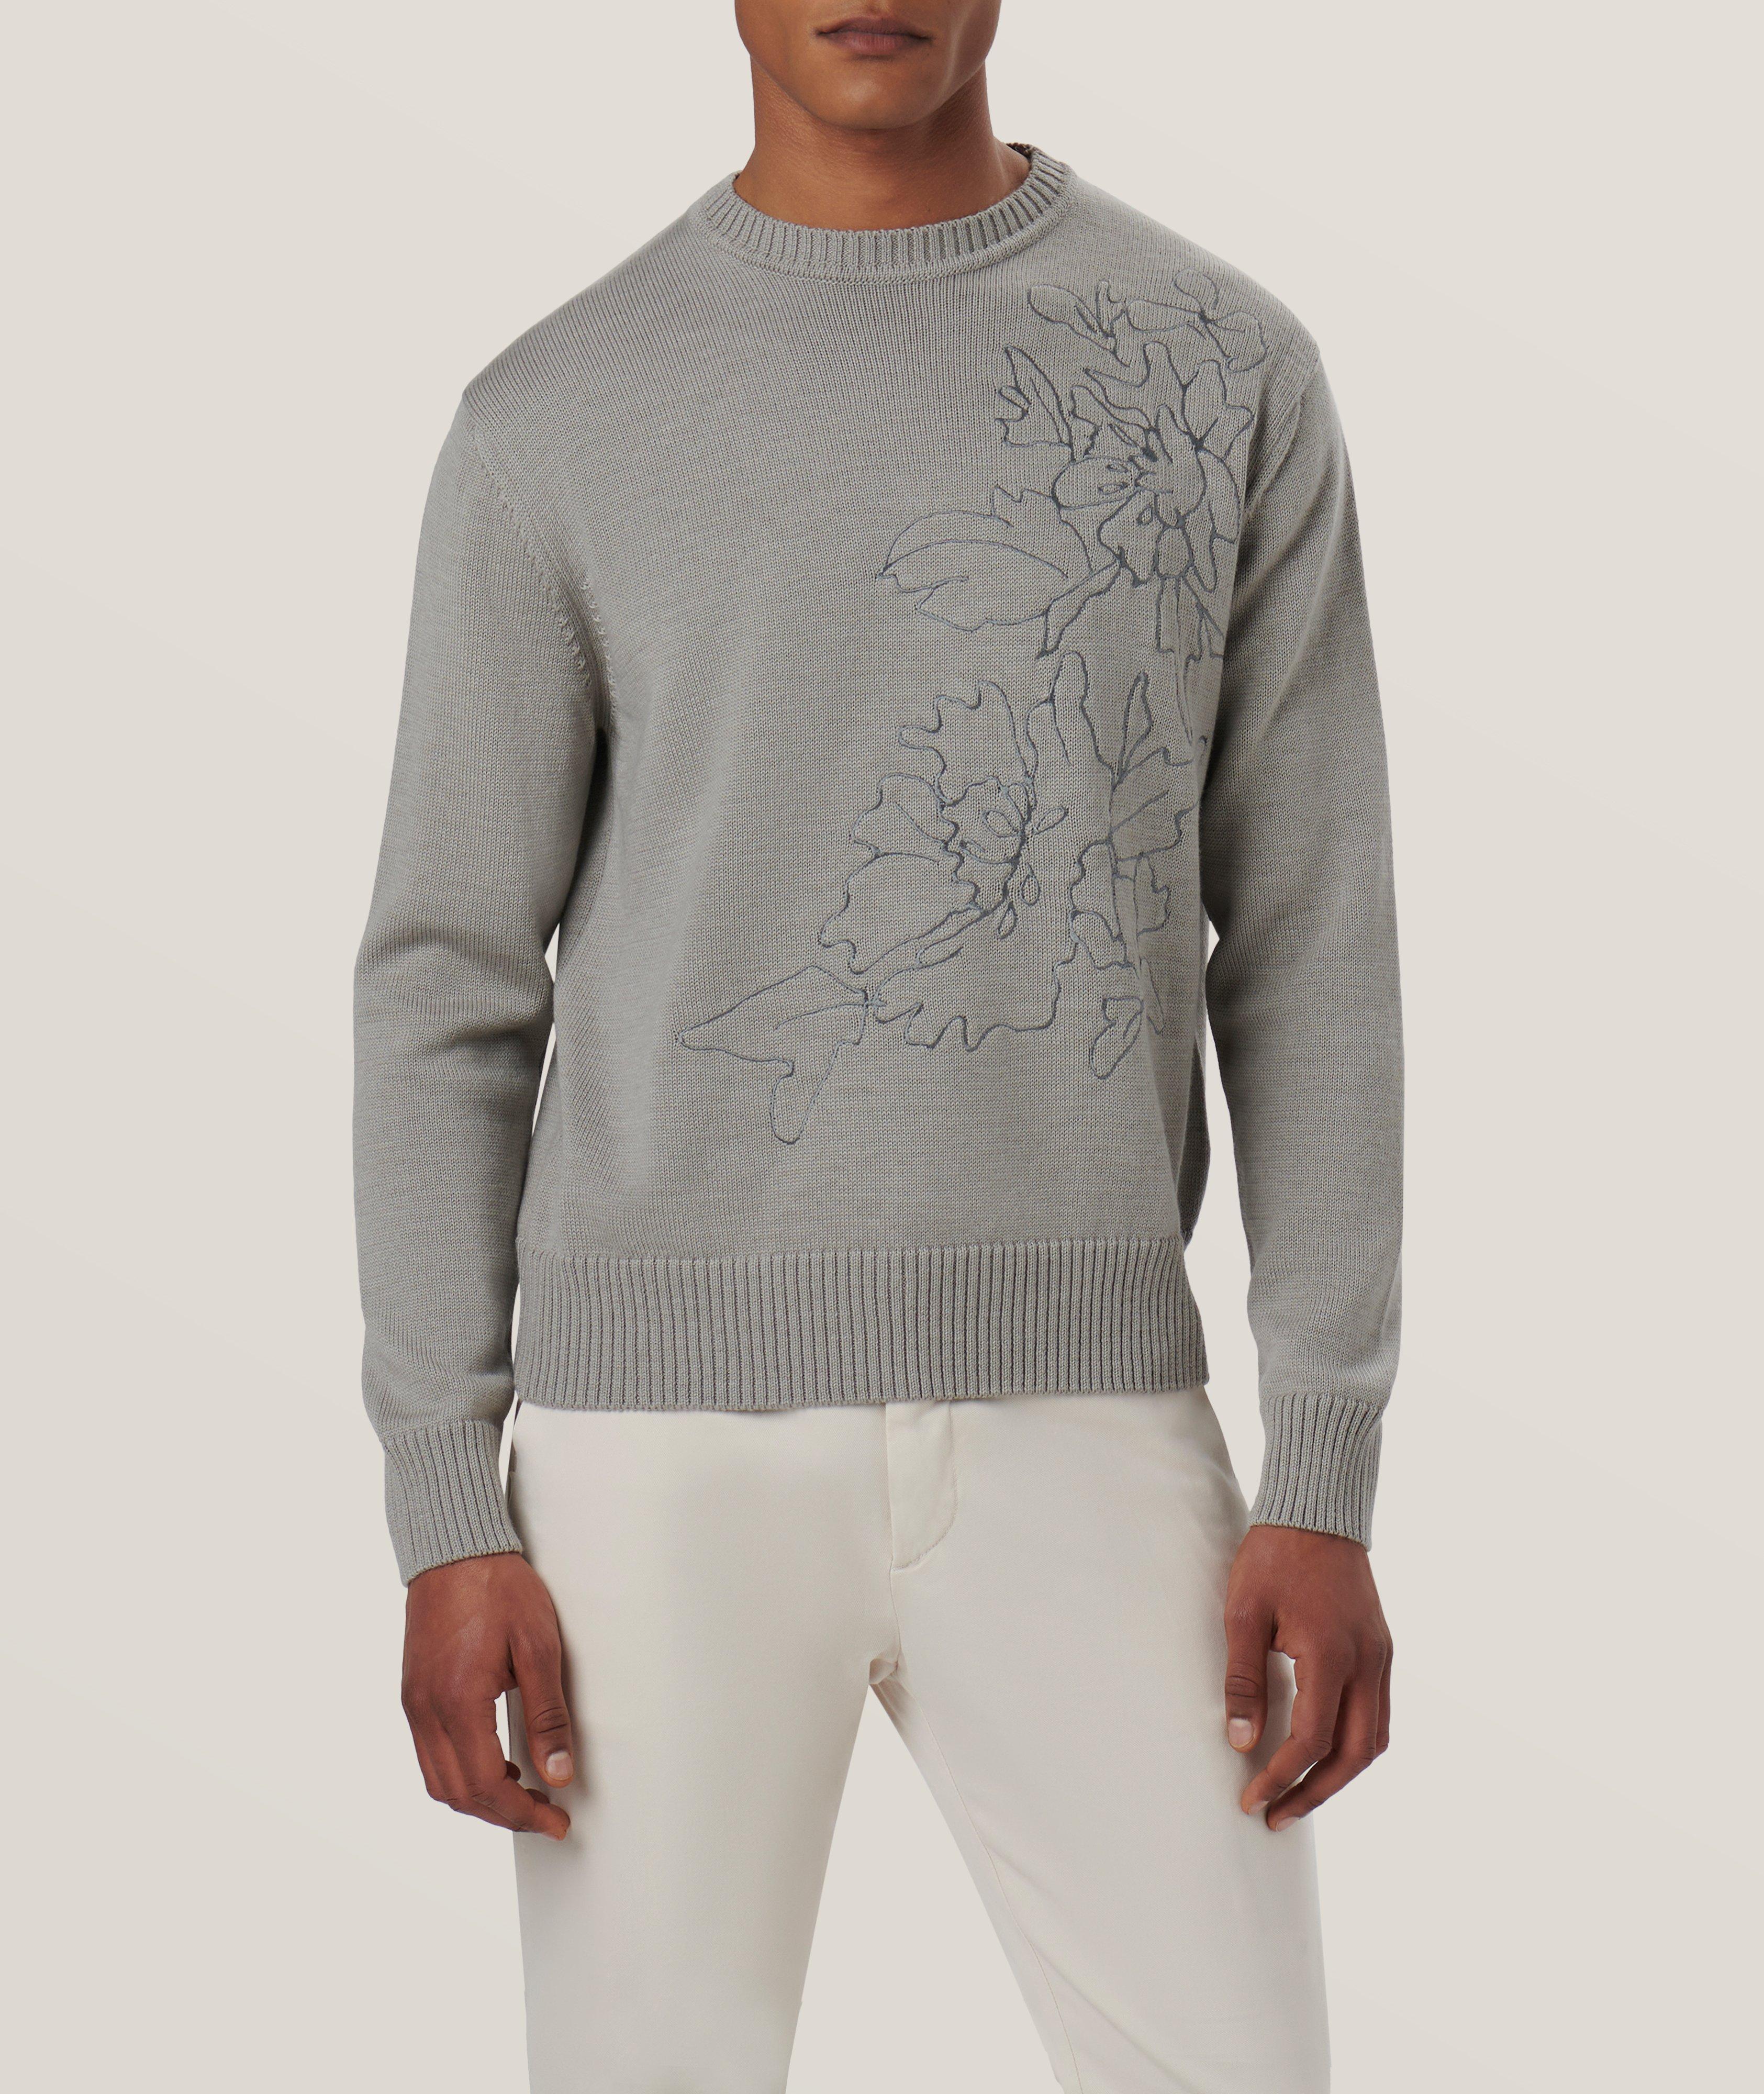 Floral Embroidered Merino Wool Sweater image 2